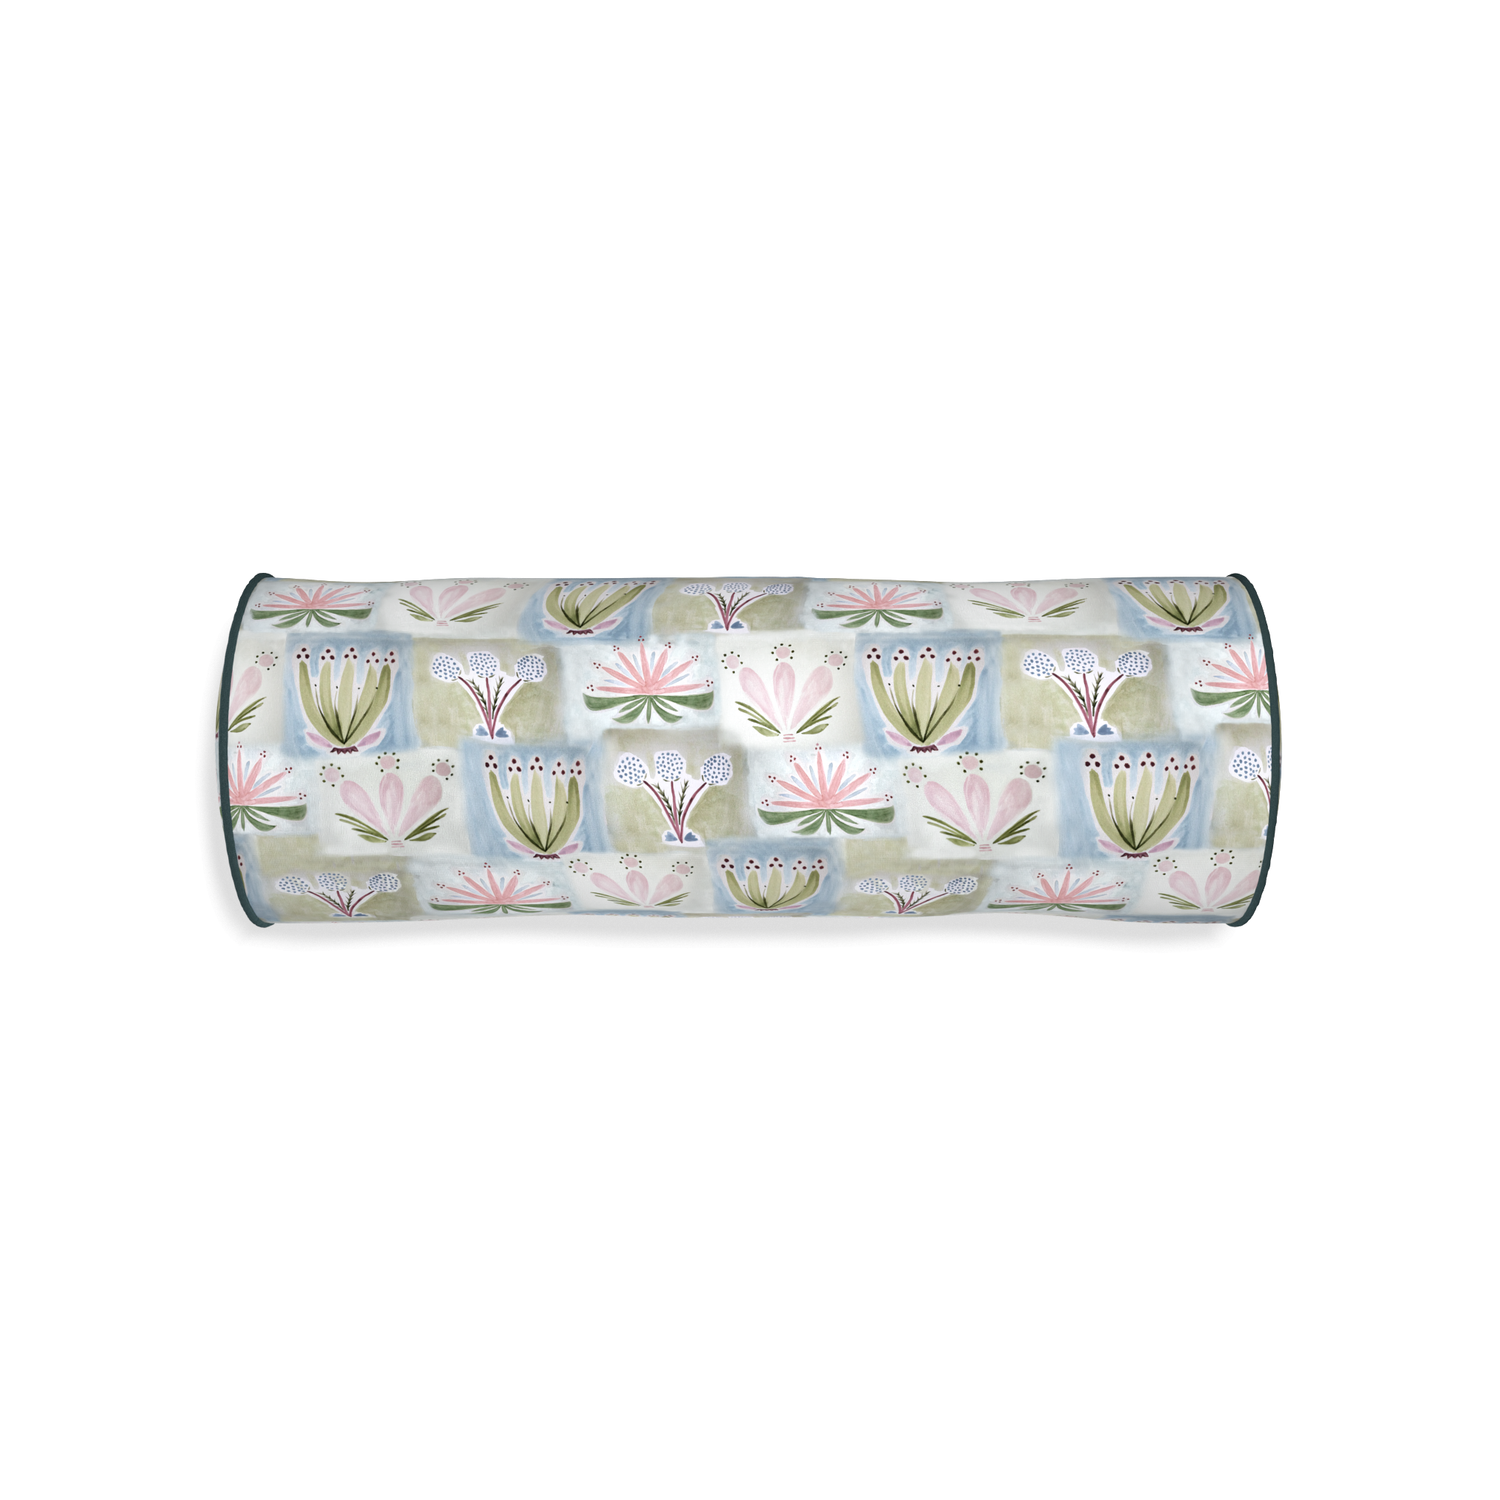 Bolster harper custom hand-painted floralpillow with p piping on white background